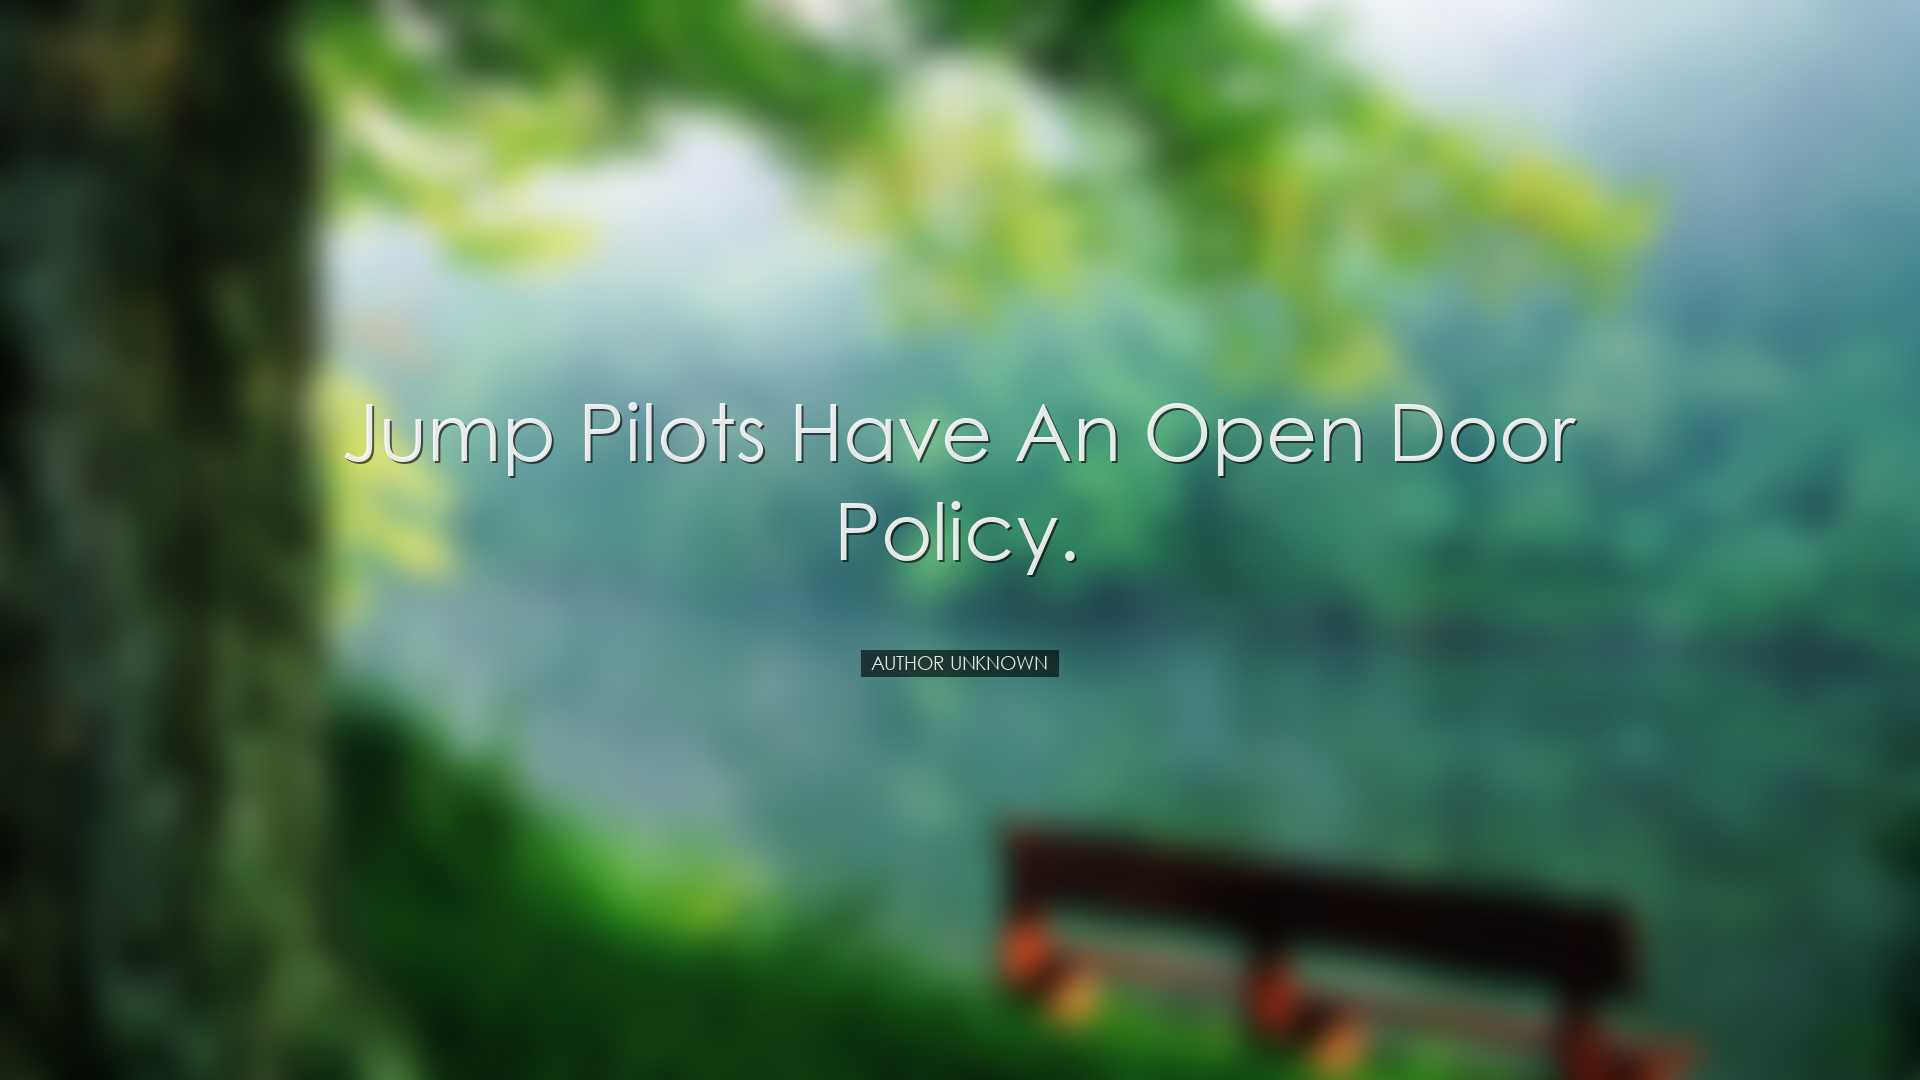 Jump pilots have an open door policy. - Author Unknown